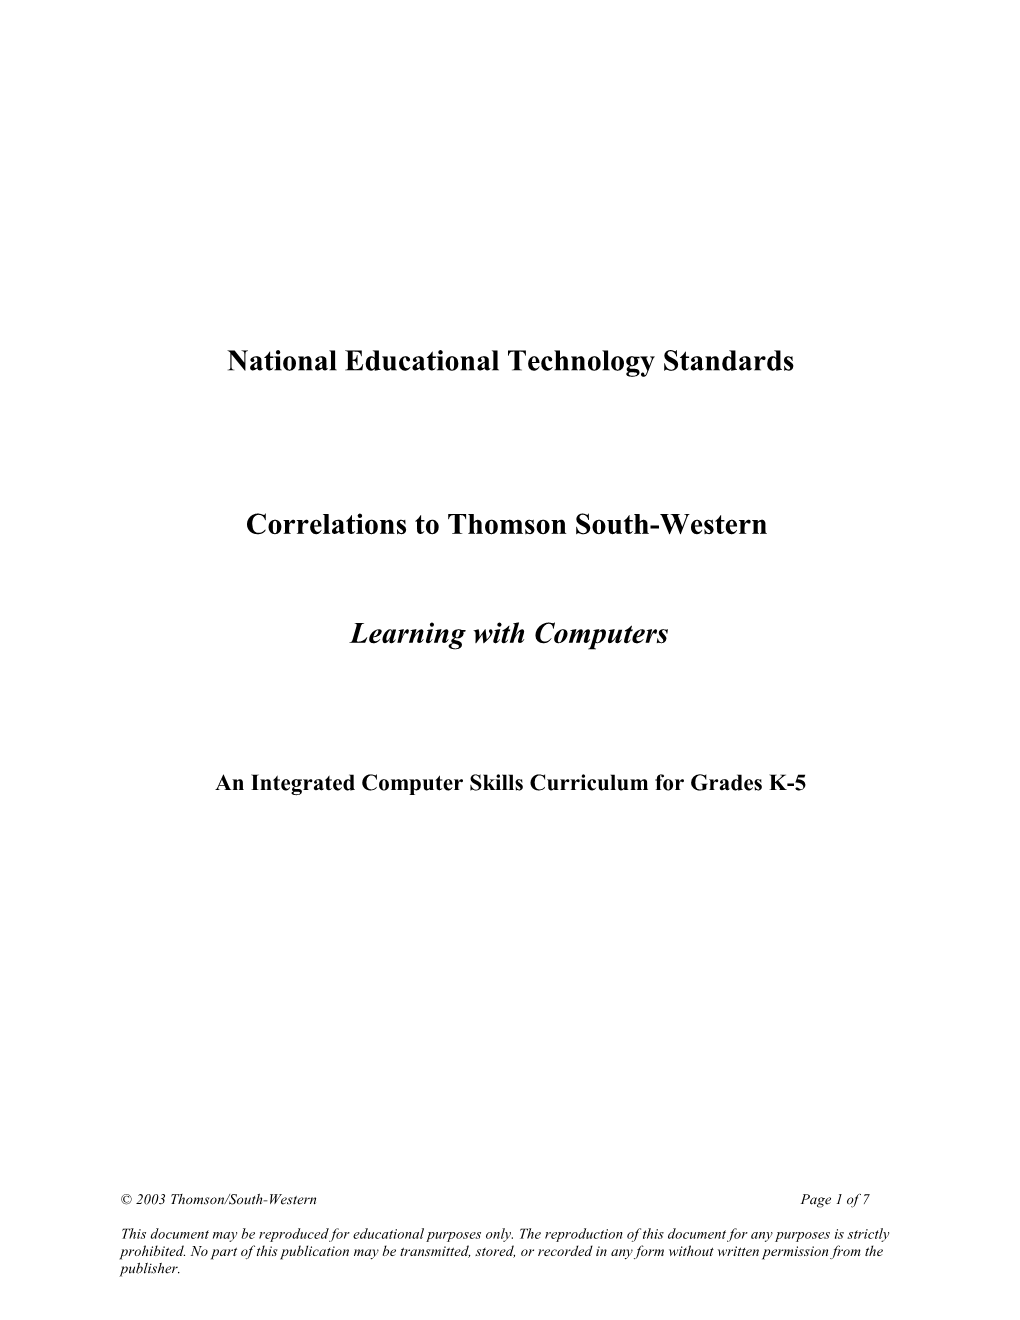 Thomson/South-Western Computer Literacy Scope and Sequence